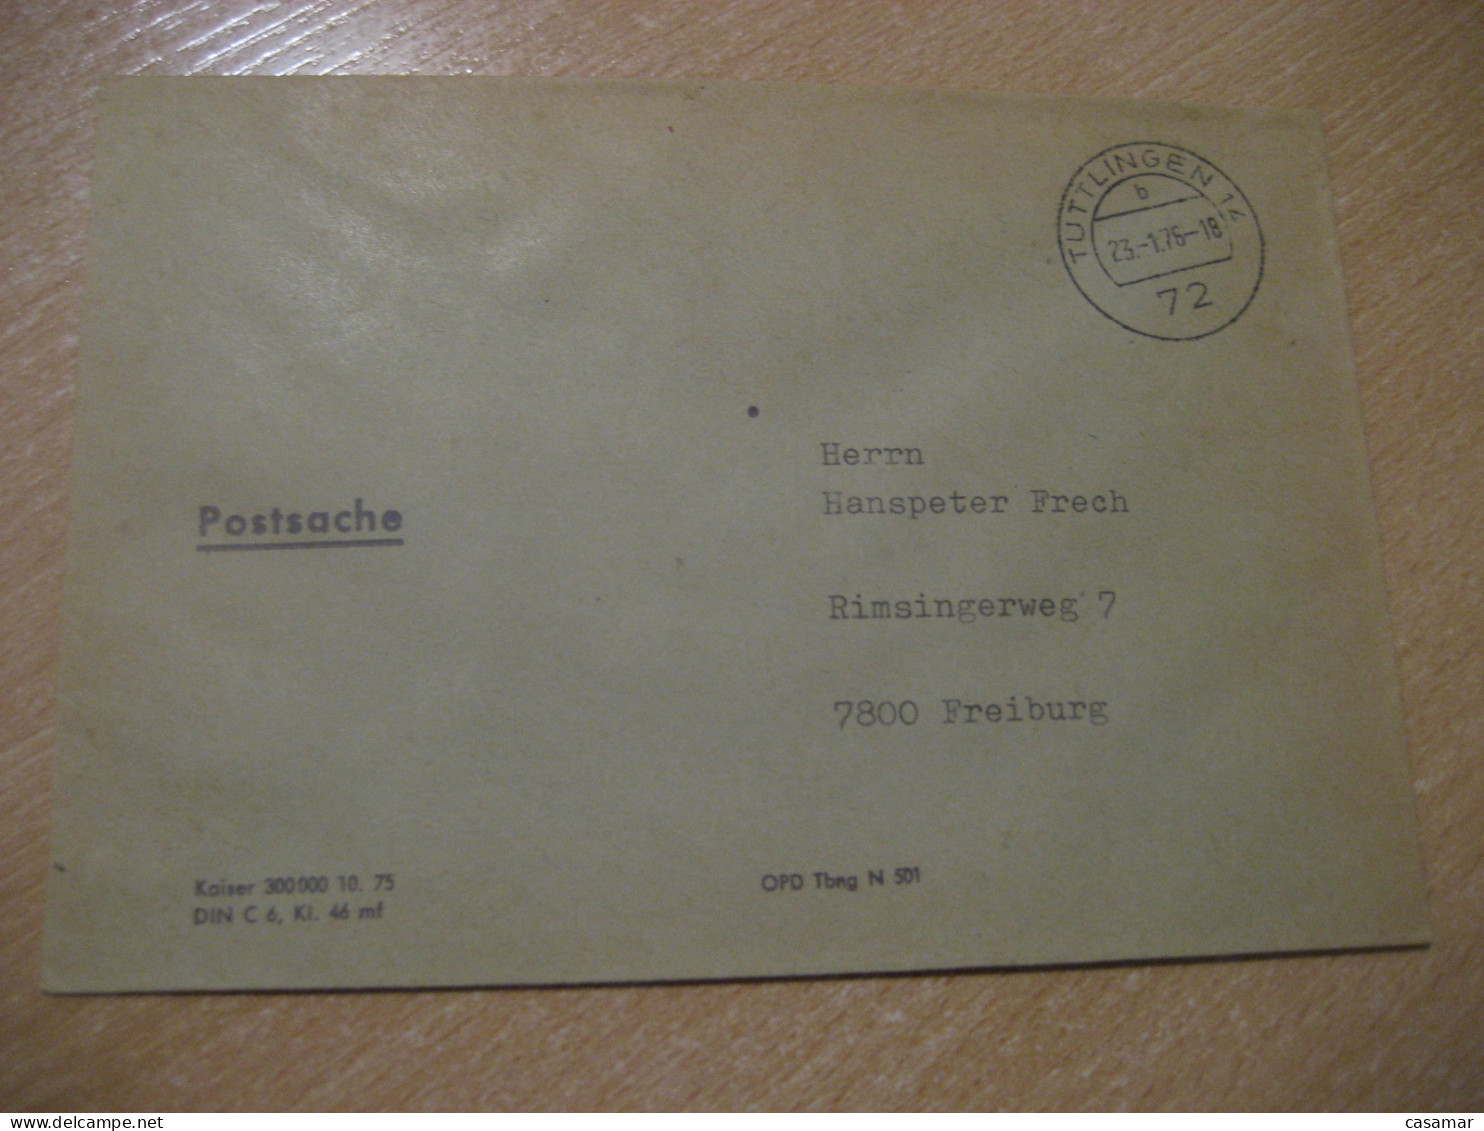 TUTTLINGEN 1976 To Freiburg Postage Paid Cancel Cover GERMANY - Lettres & Documents